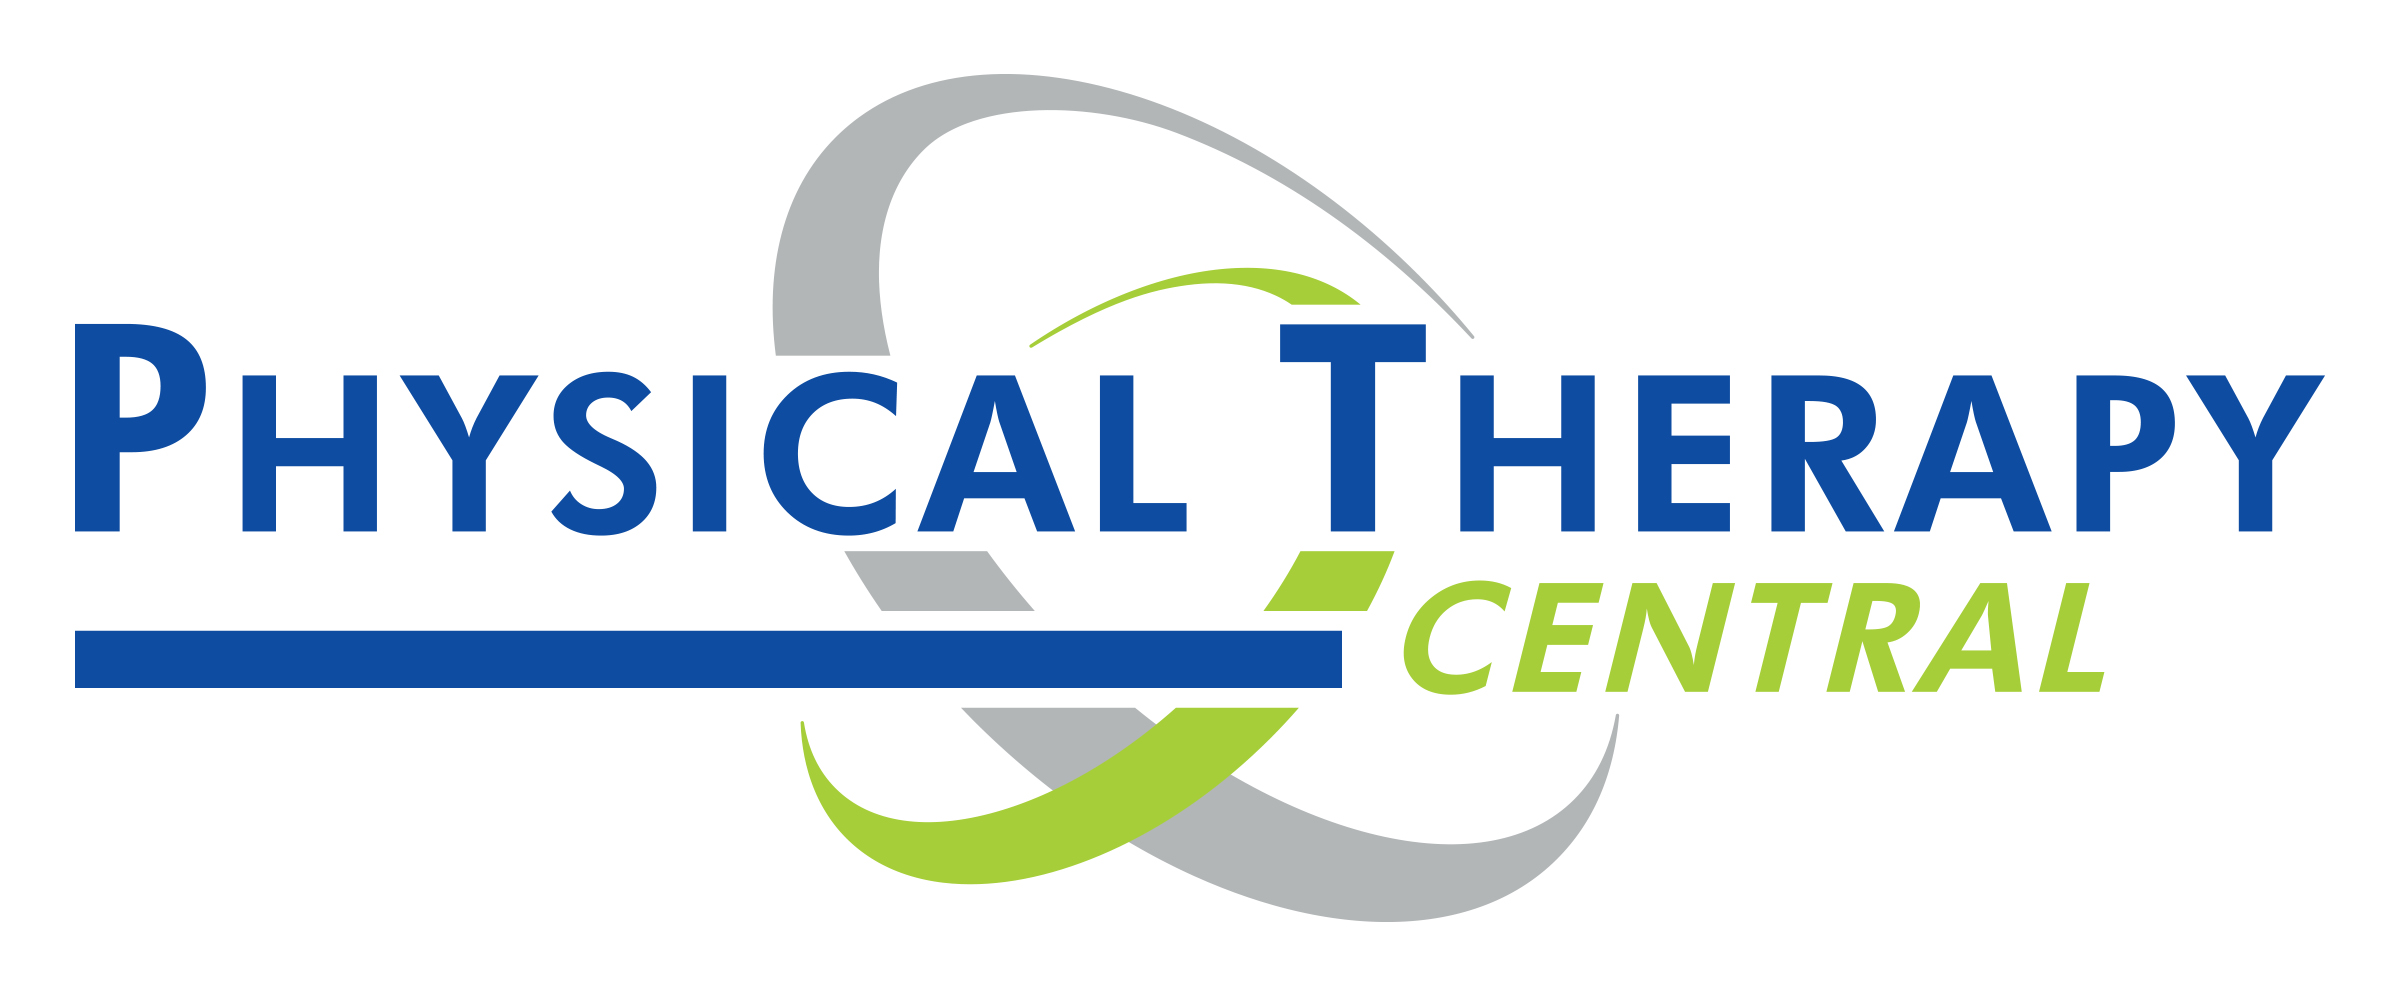 Physical Therapy Central-ADA